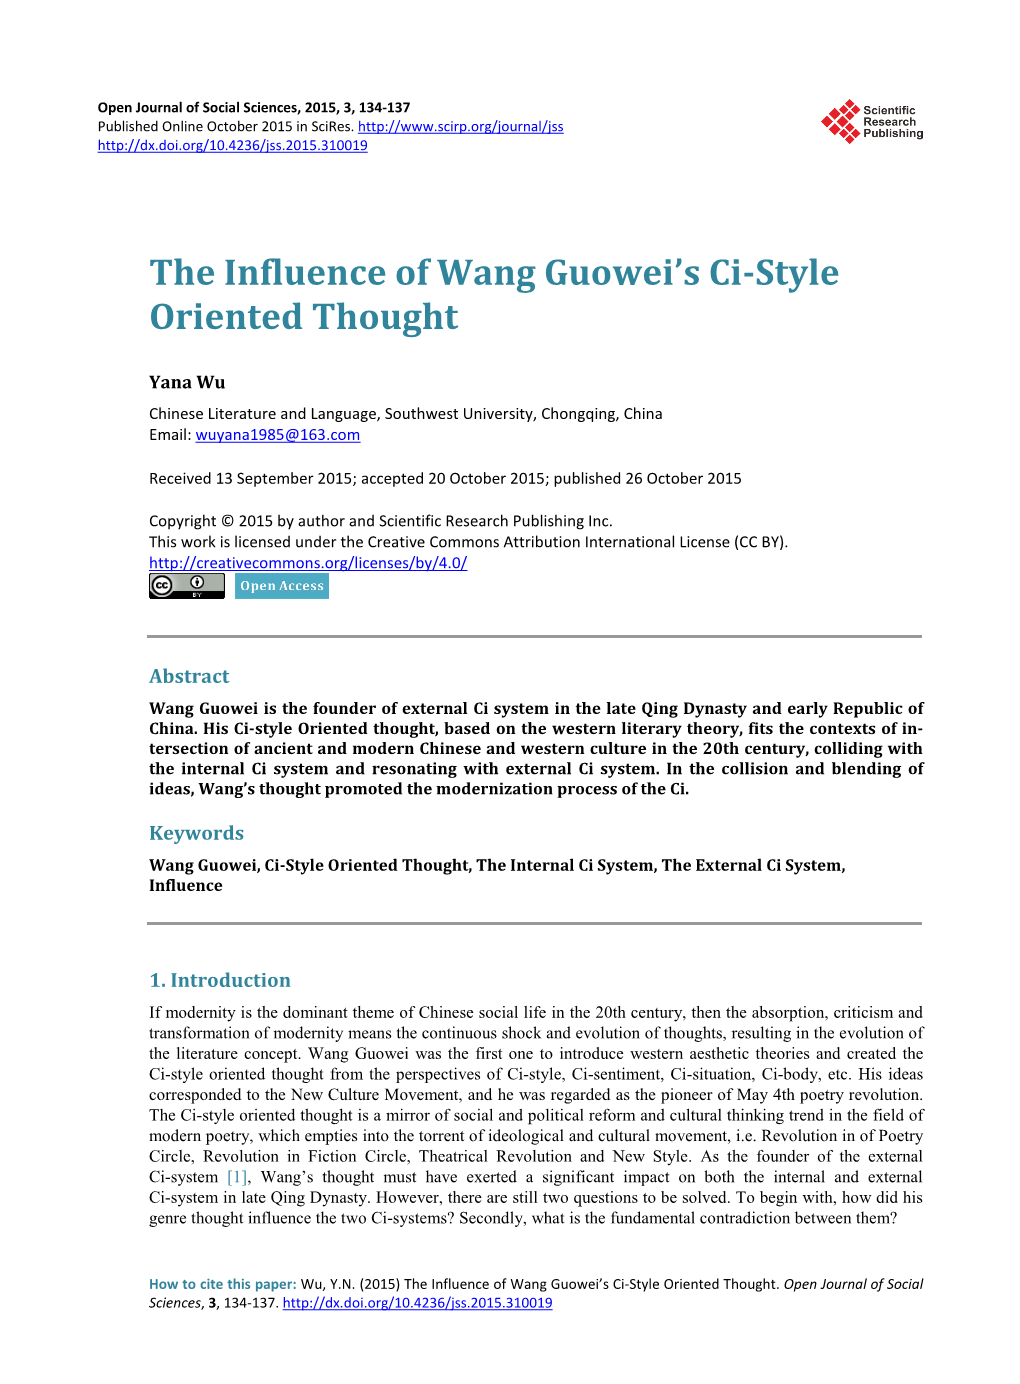 The Influence of Wang Guowei's Ci-Style Oriented Thought